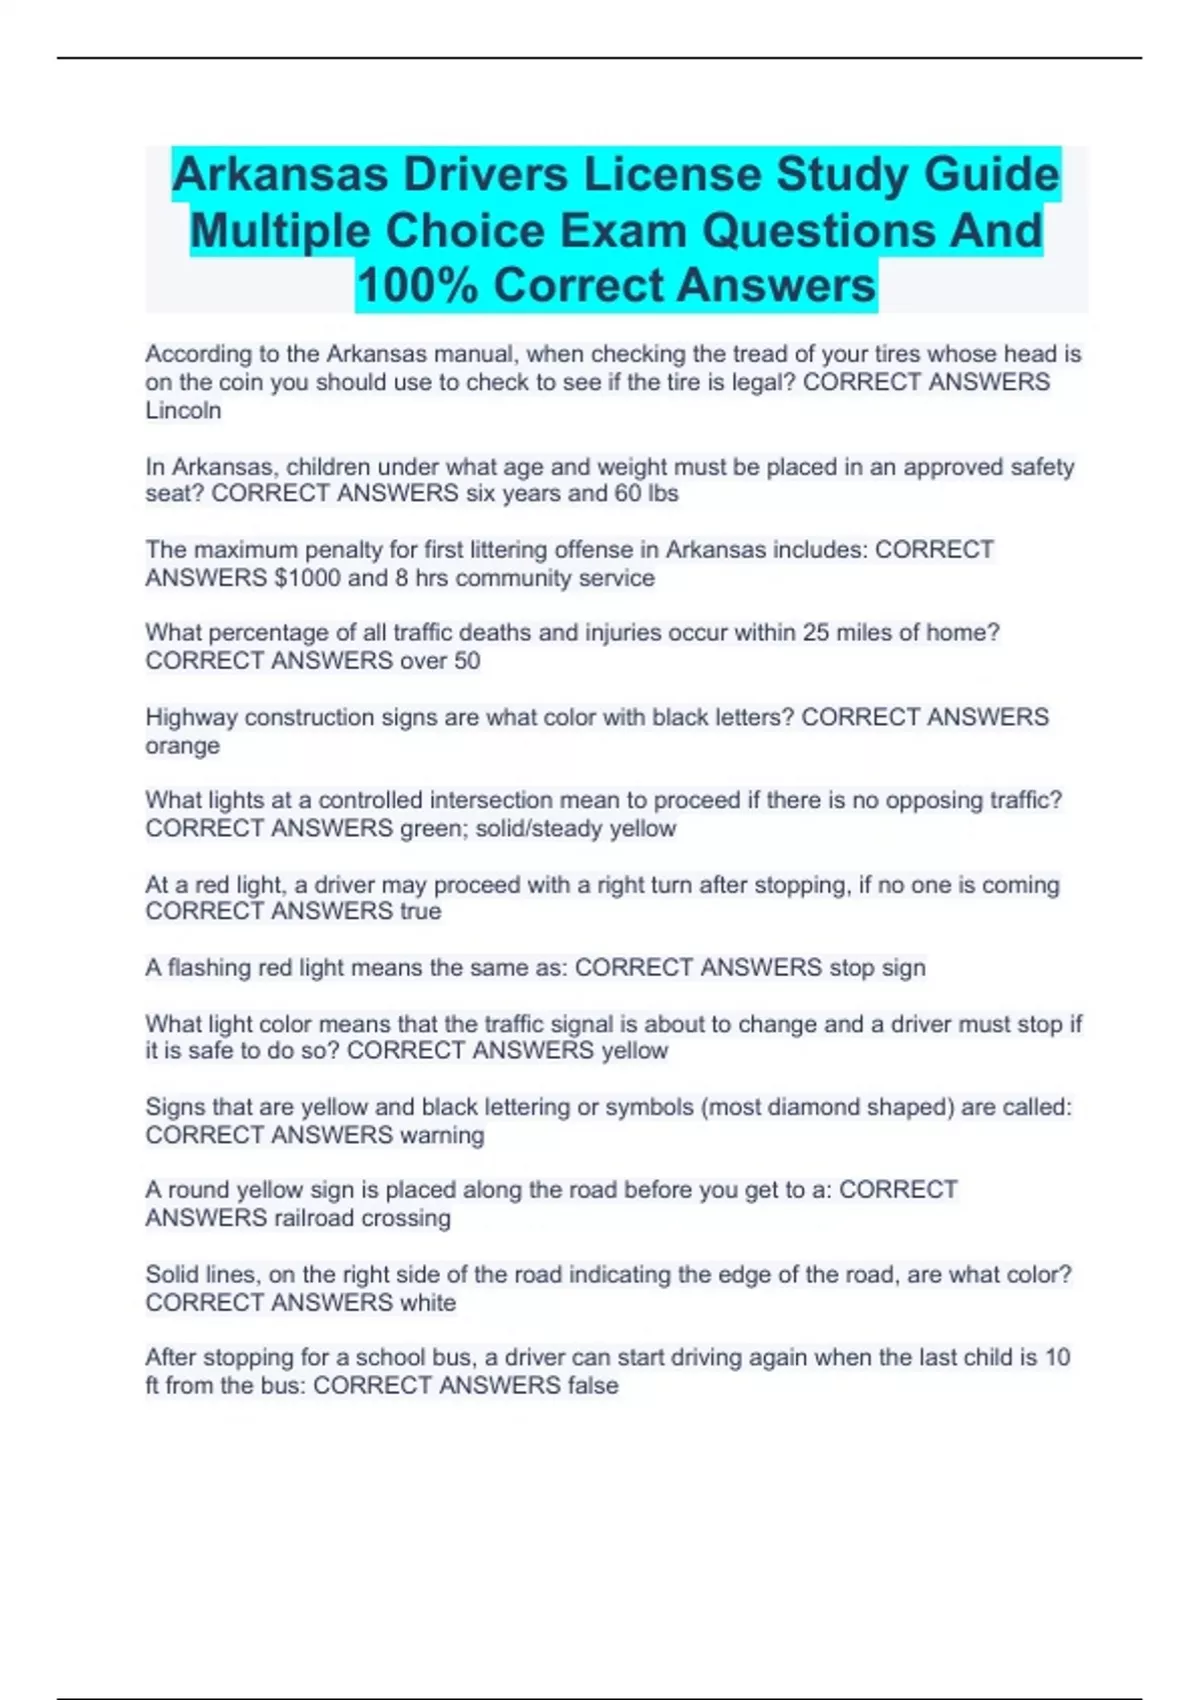 Arkansas Drivers License Study Guide Multiple Choice Exam Questions And